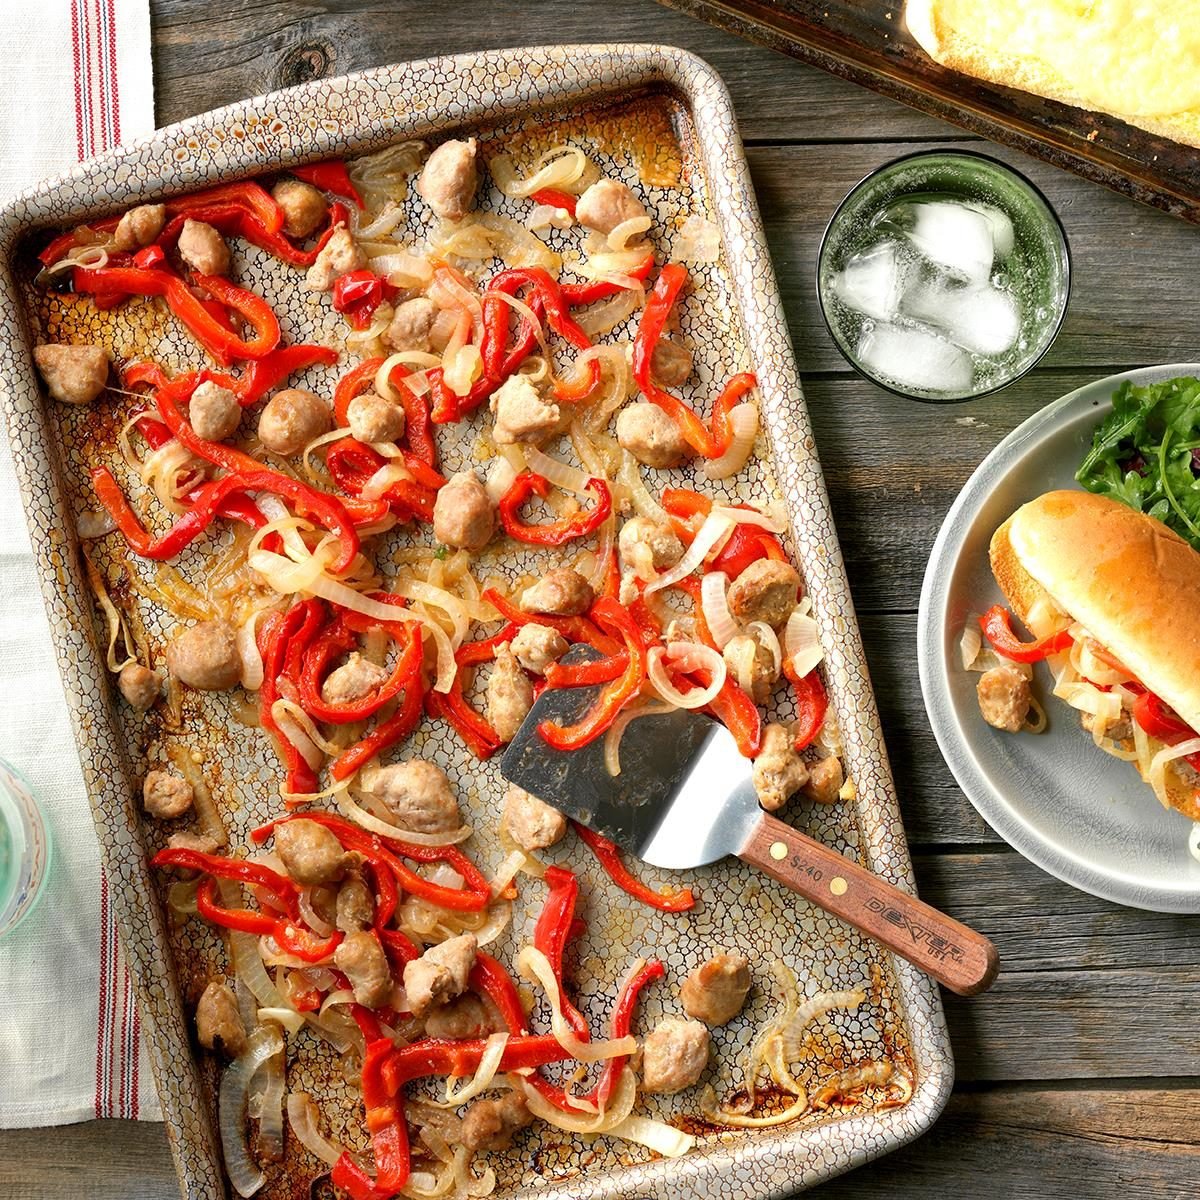 Sausage And Pepper Sheet Pan Sandwiches Exps Thfm18 207720 D09 14 4b 13